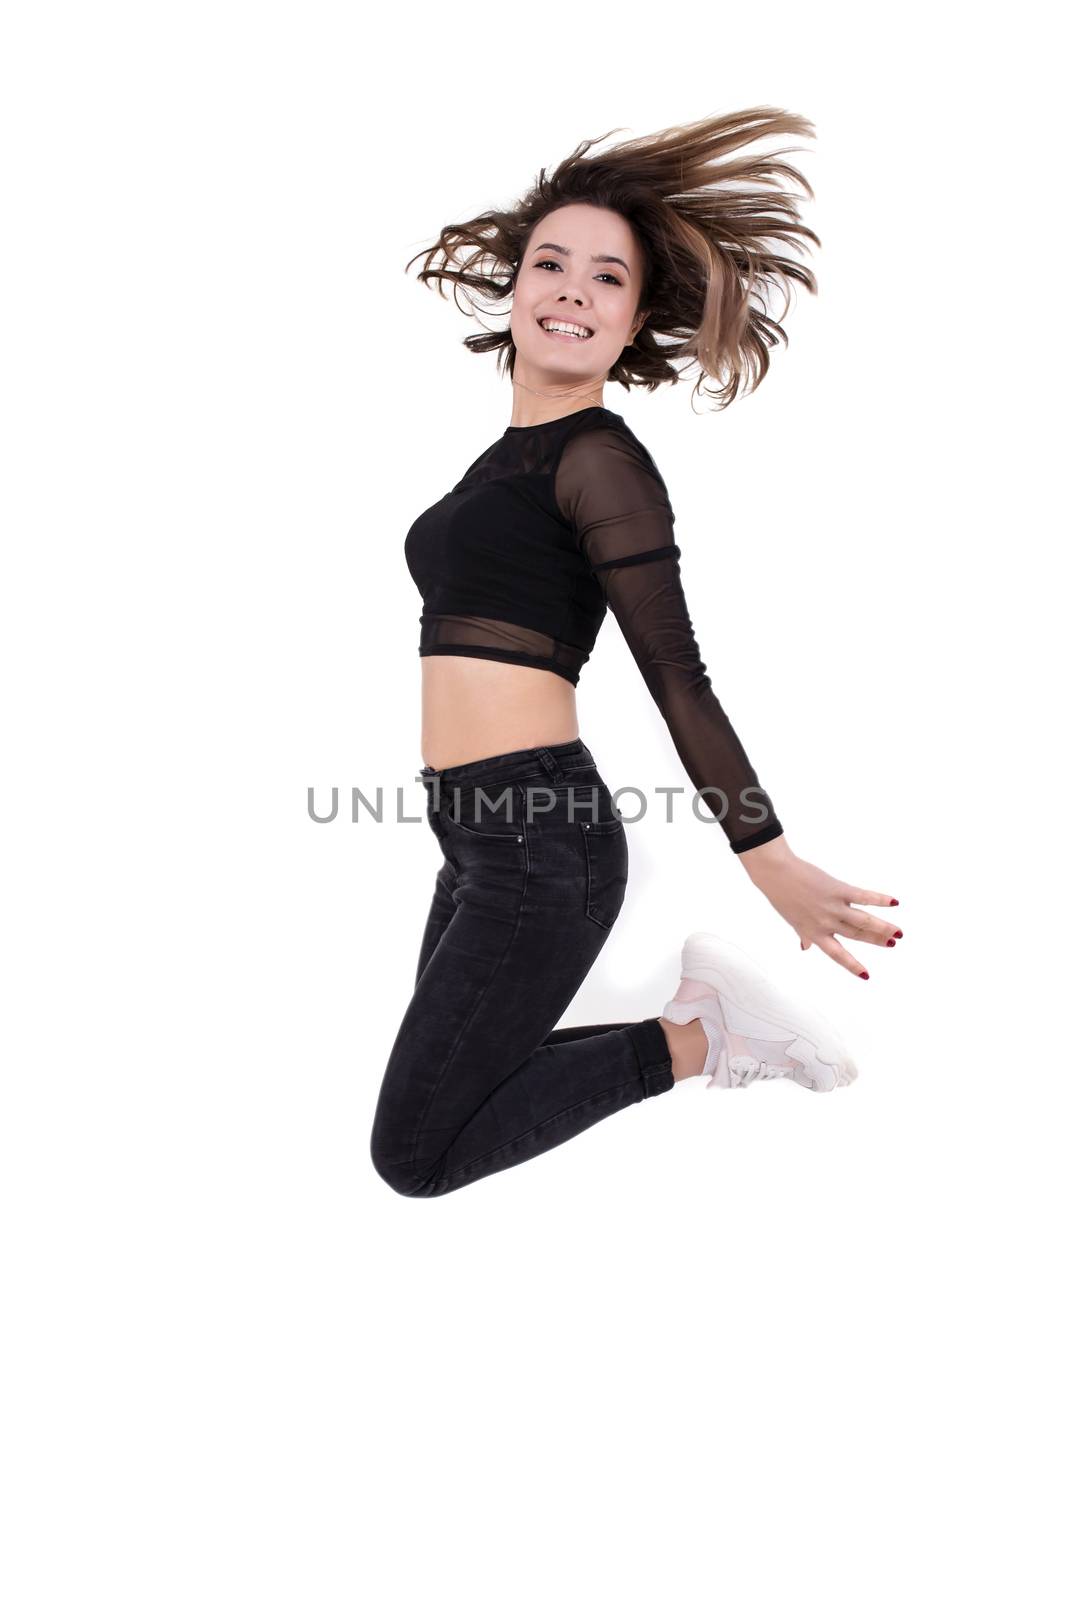 Young girl dancer jumping up on white isolated